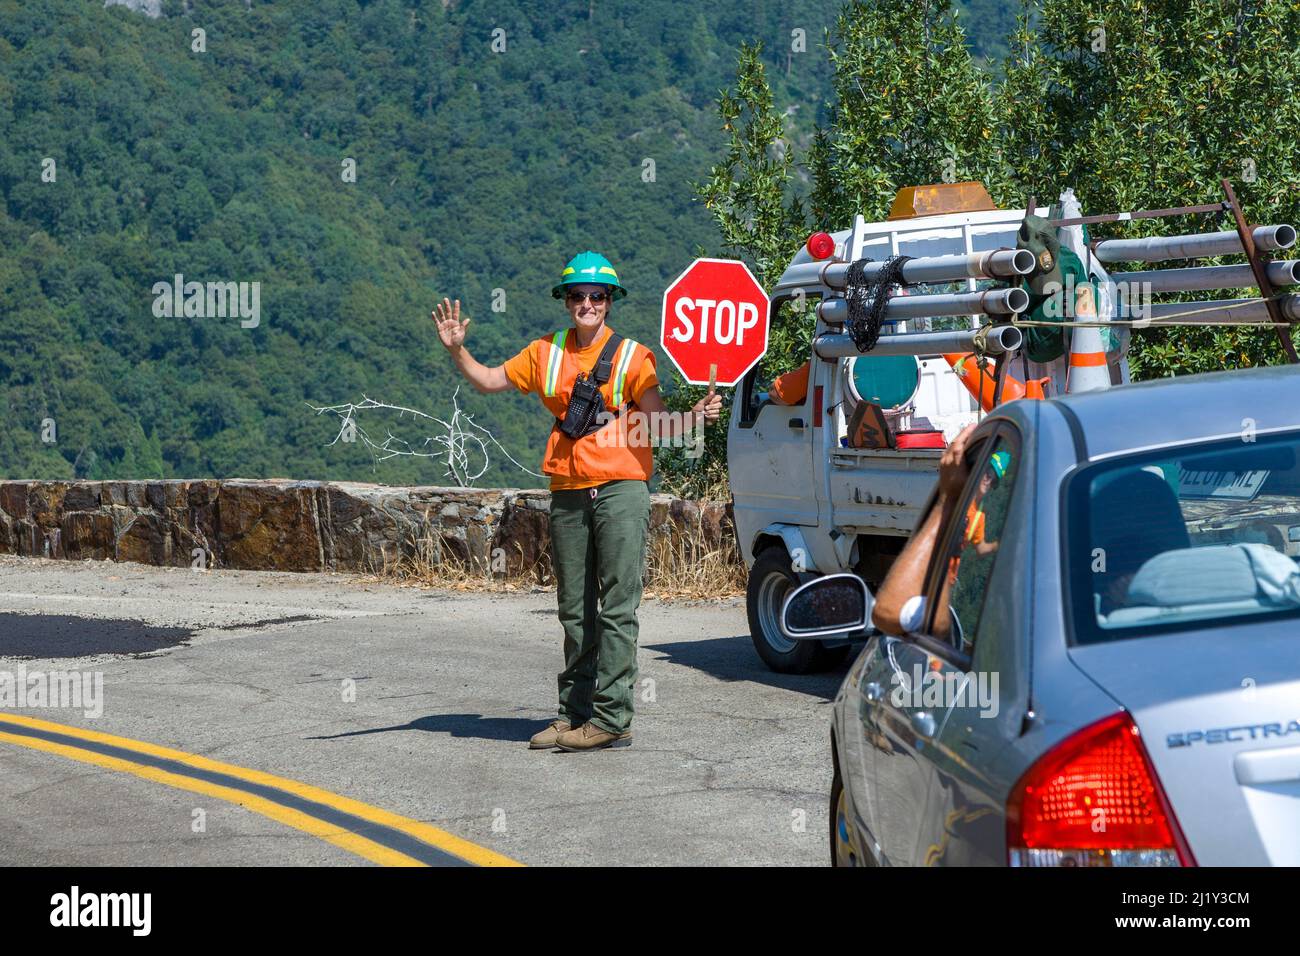 Sequoia Park, USA - July 21, 2008: woman stops car at the construction site of a winding road in the national park. Stock Photo